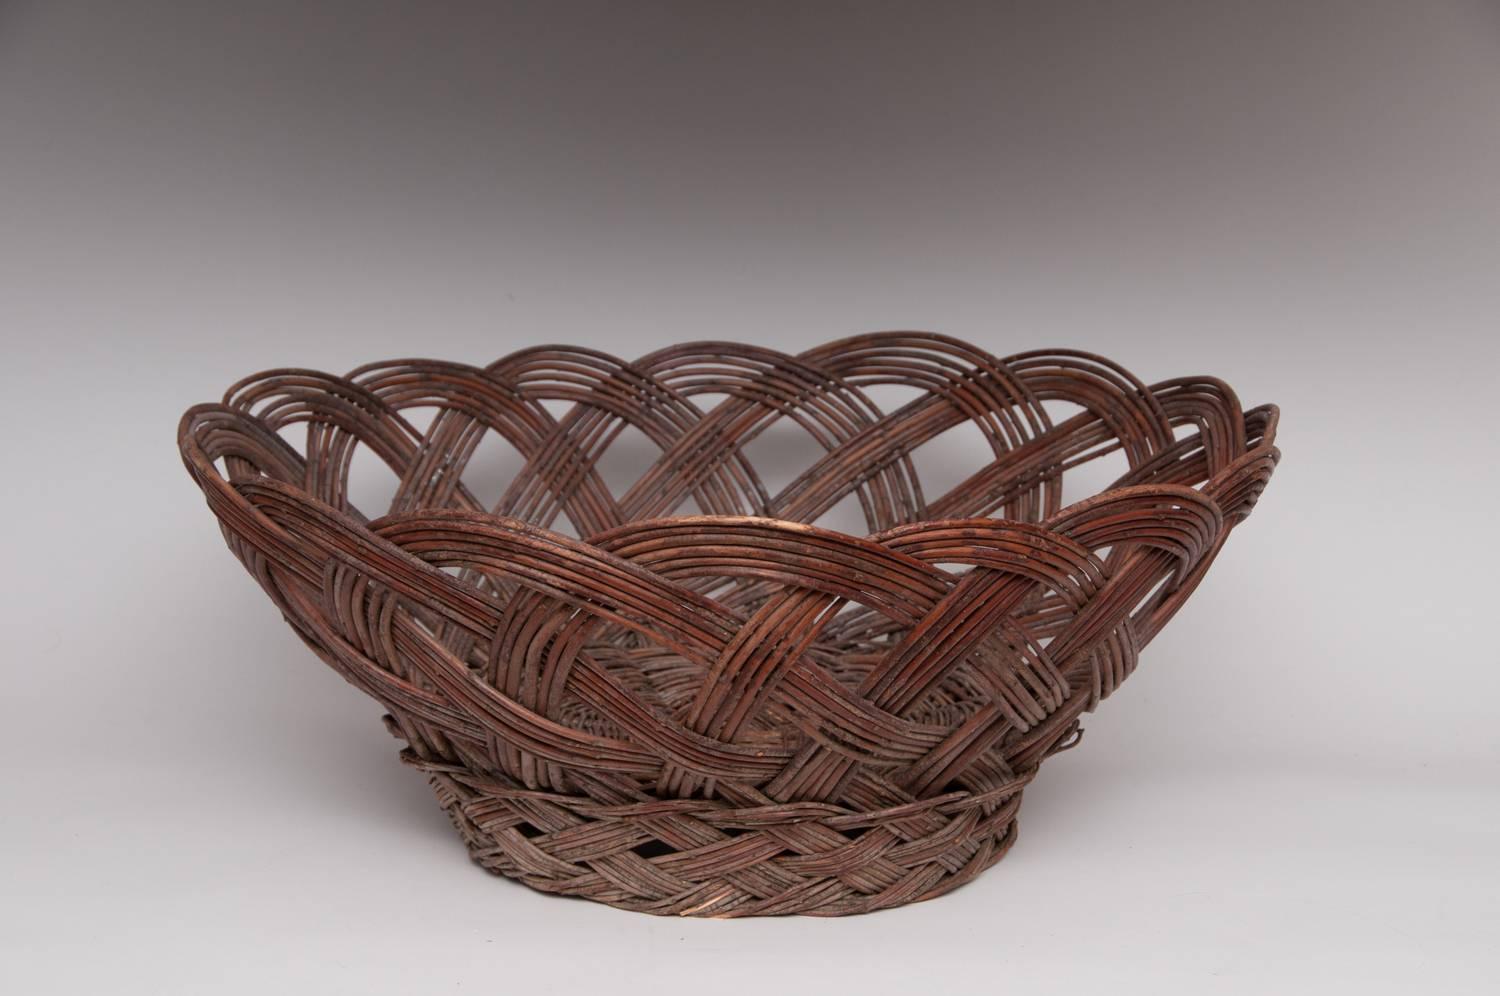 Region / Tribe: Southwest / Jemez Pueblo (?)

circa 20th century

Material: Willow rod

Dimension:

Left: L. 15” x H. 6”

Right: L. 26” x H. 11”

Condition: Excellent, no restoration

Comments: Plaited wicker baskets are also made by